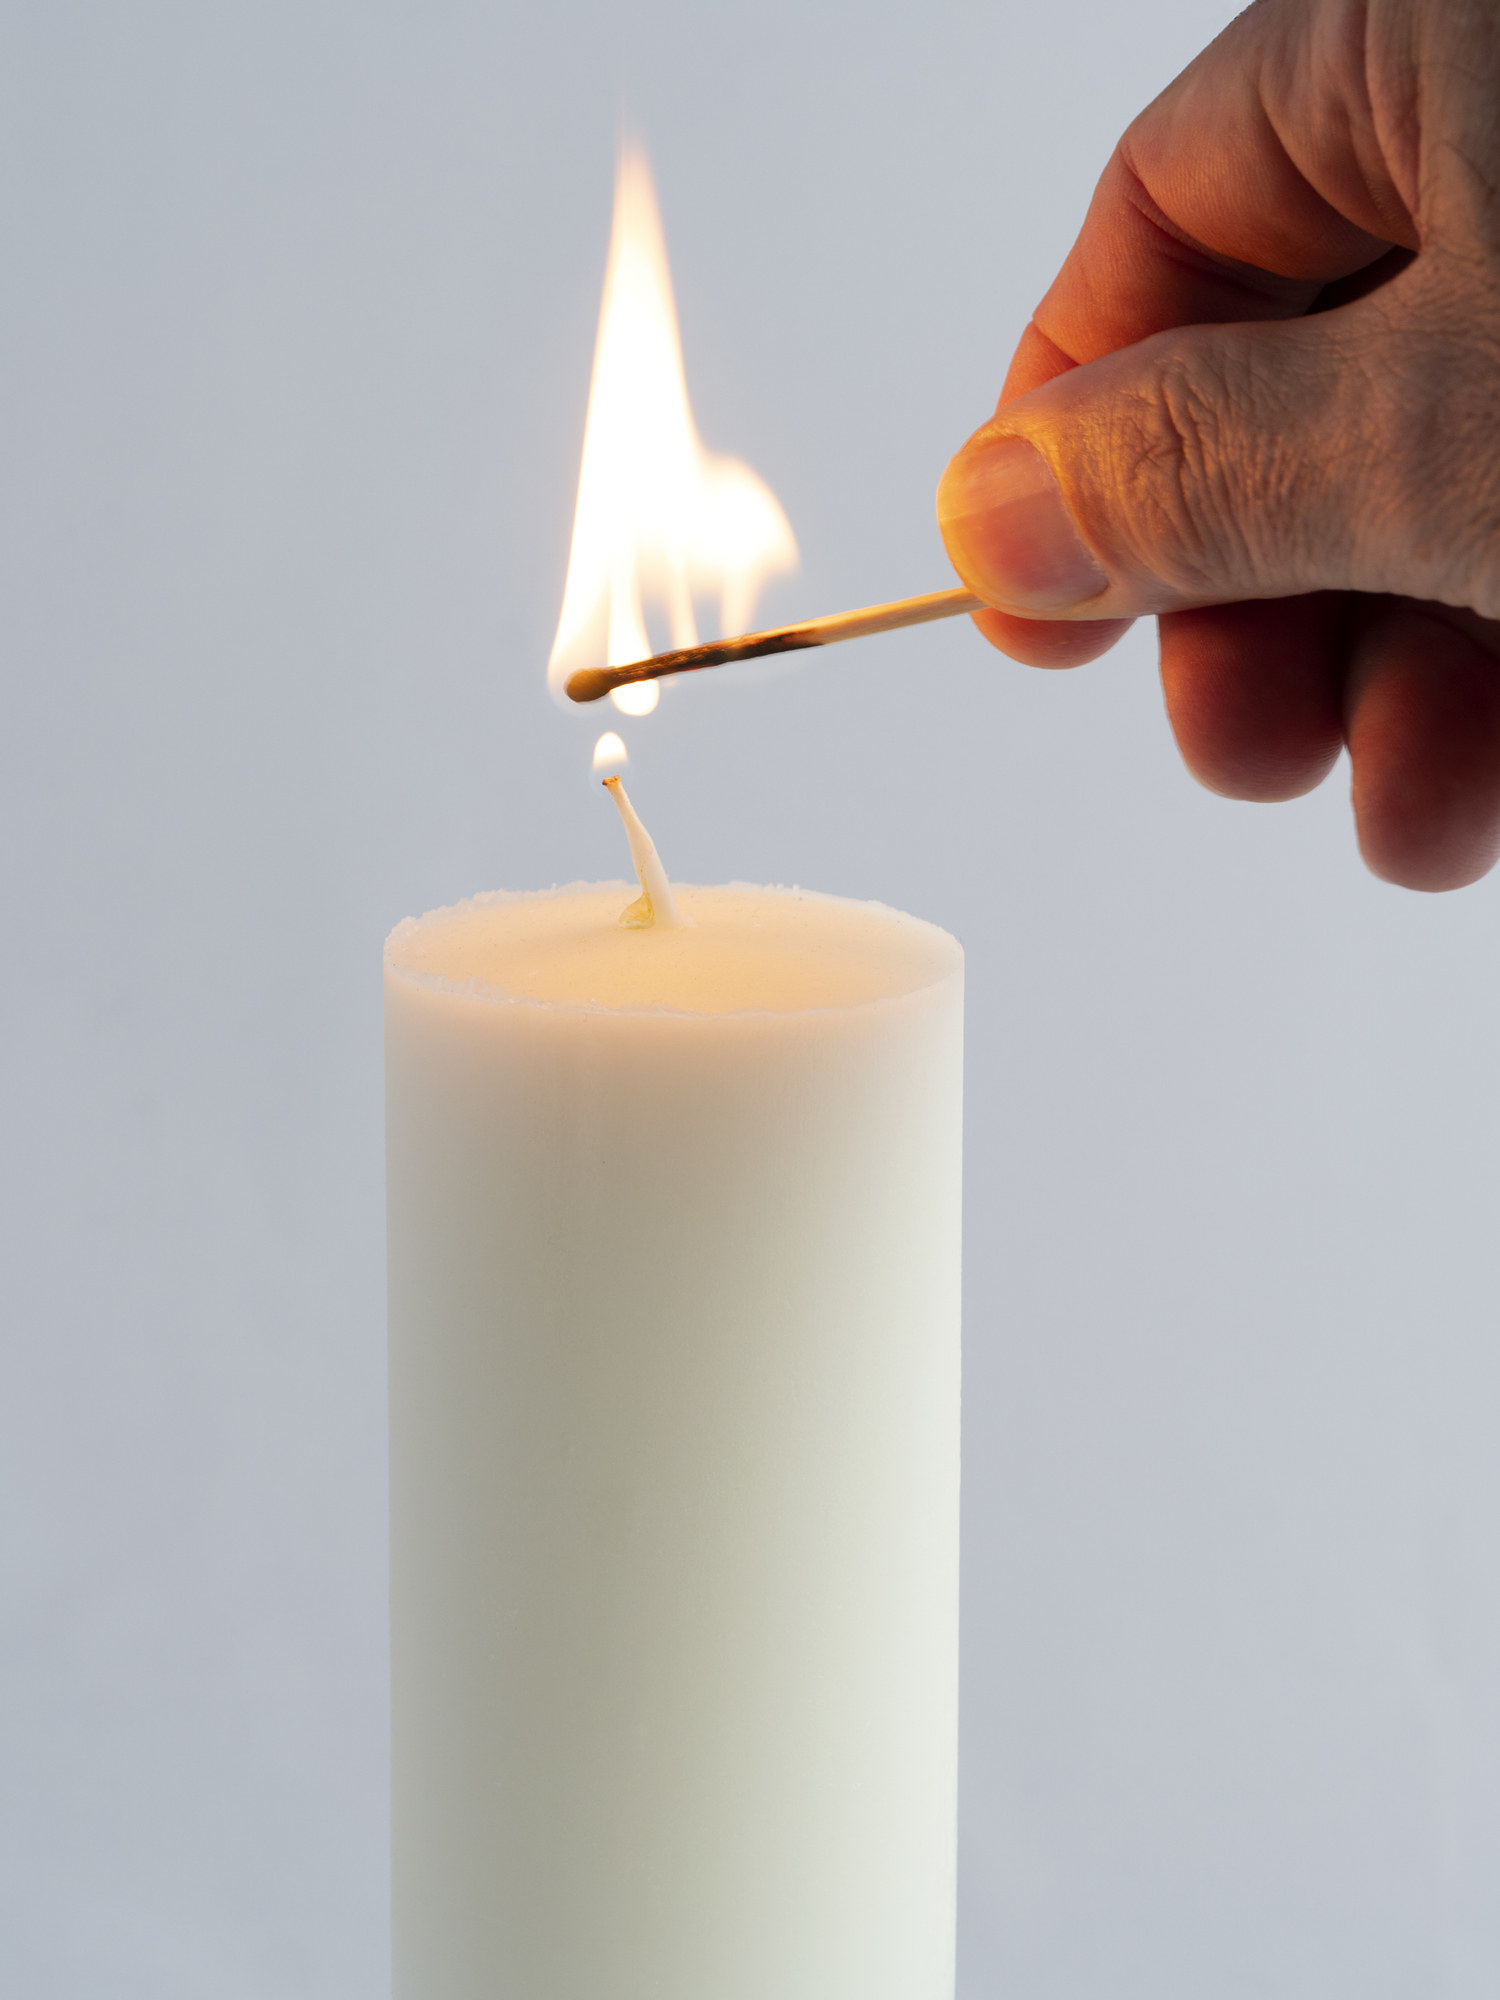 match lighting a candle